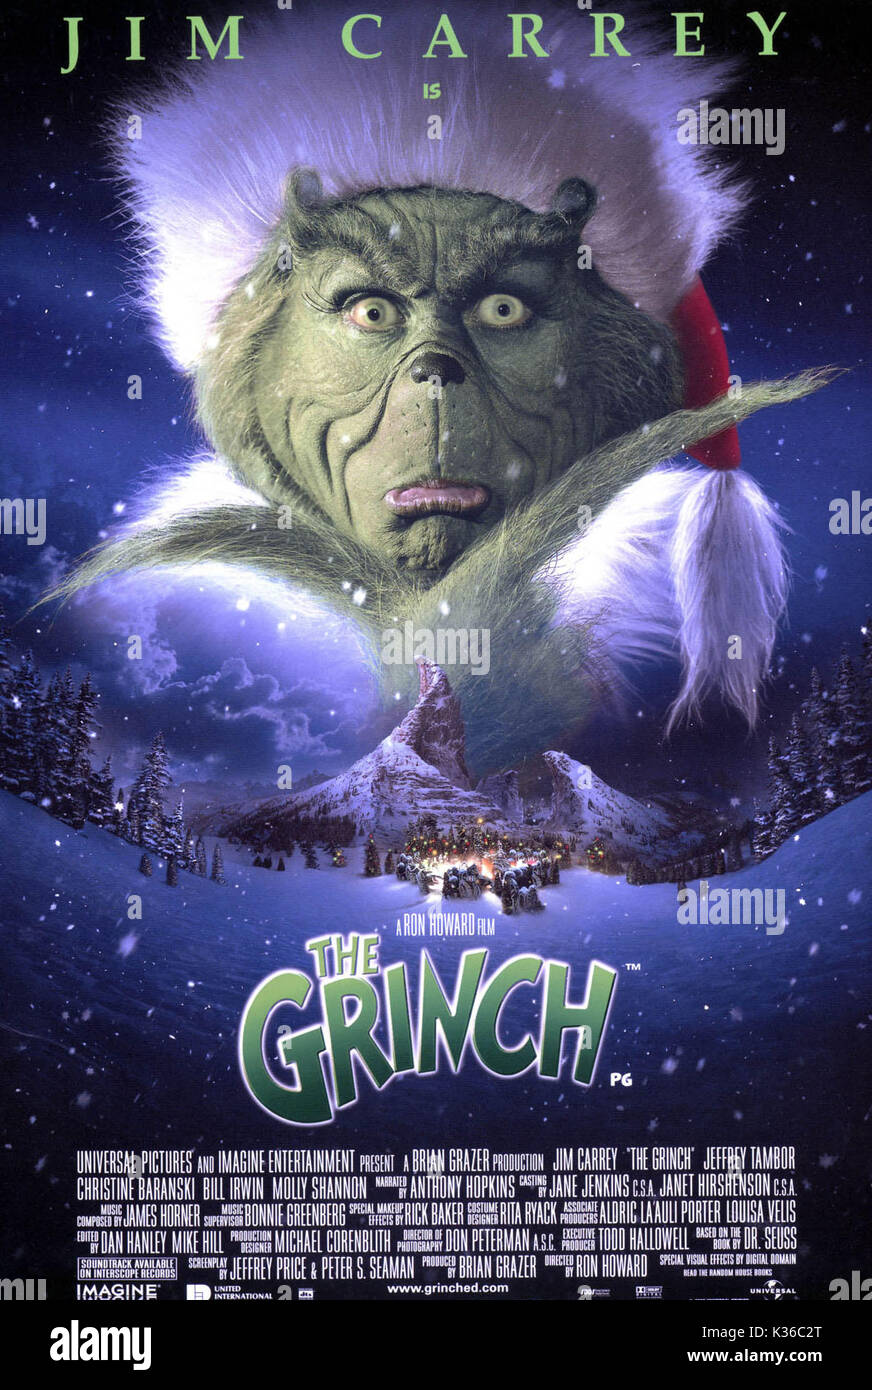 https://c8.alamy.com/comp/K36C2T/the-grinch-poster-from-the-ronald-grant-archive-an-imagine-entertainment-K36C2T.jpg